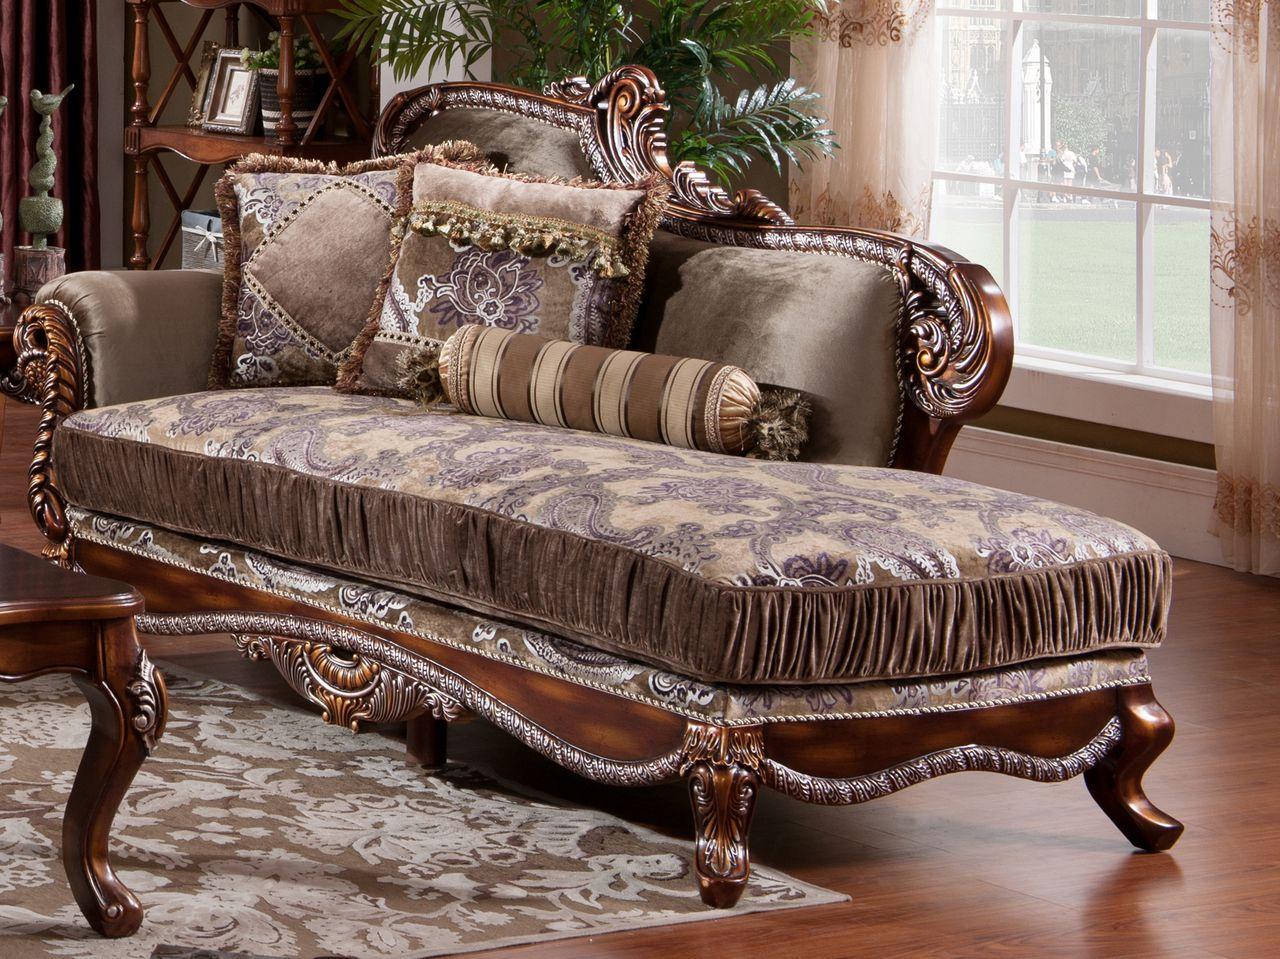 Traditional Chaise Janet Janet-Chaise in Cherry Fabric